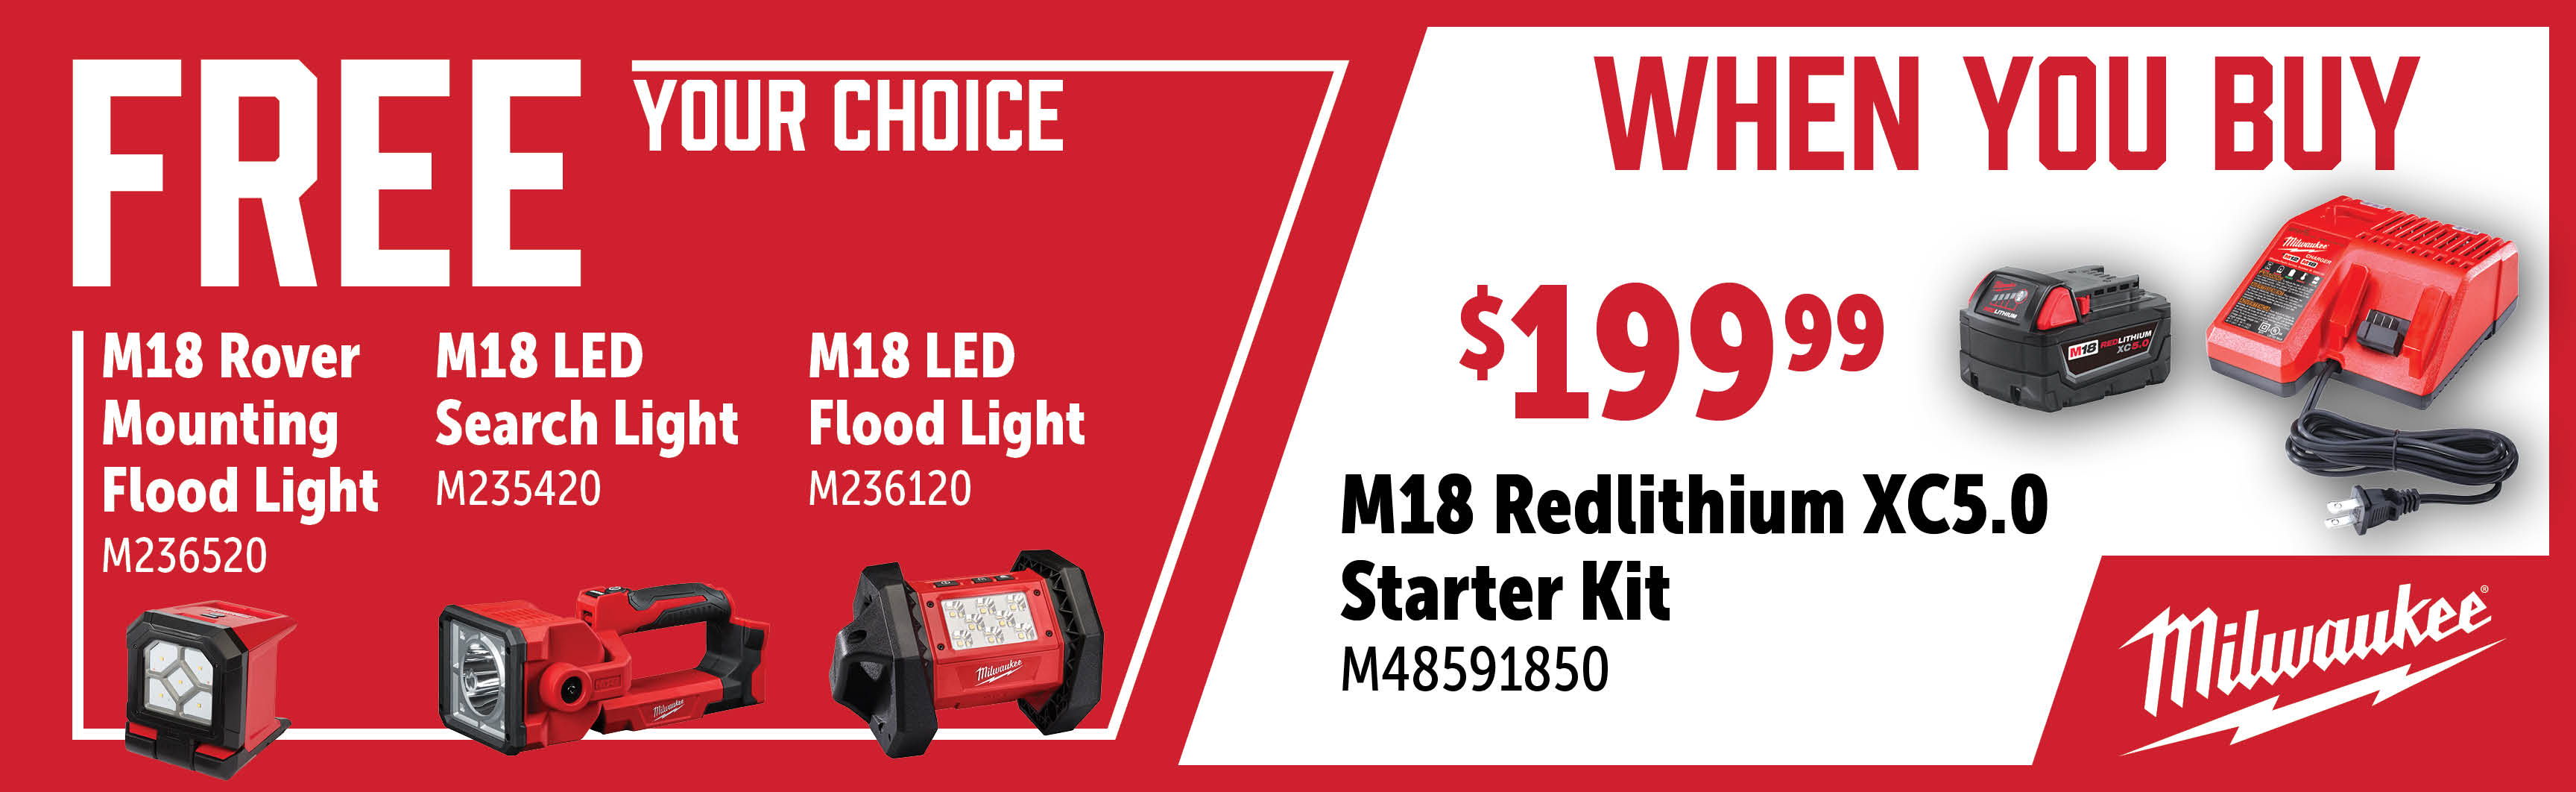 Milwaukee Aug-Oct: Buy a M48591850 Starter Kit and Get a Free M18 Light